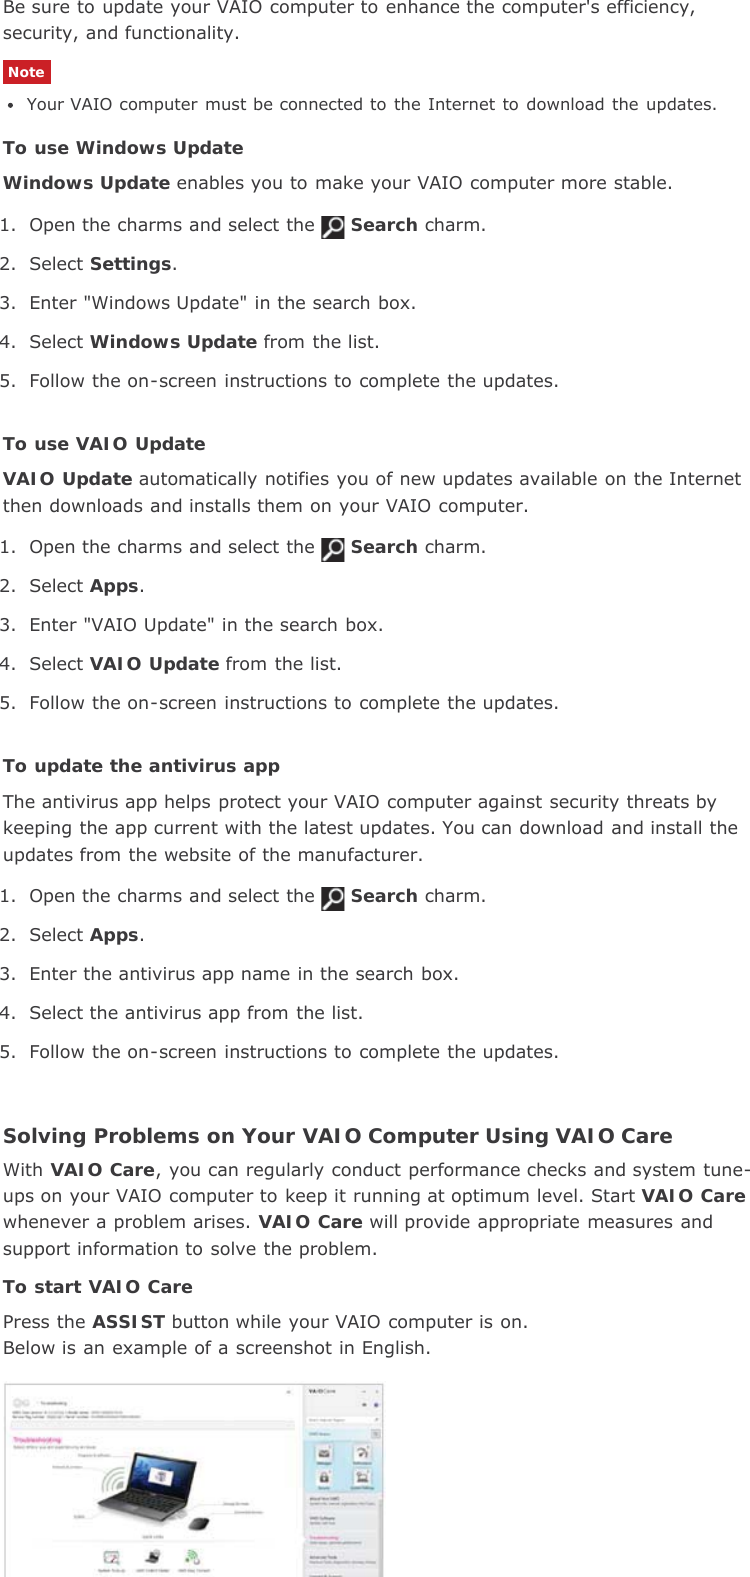 Be sure to update your VAIO computer to enhance the computer&apos;s efficiency,security, and functionality.NoteYour VAIO computer must be connected to the  Internet  to  download  the  updates.To use Windows UpdateWindows Update enables you to make your VAIO computer more stable.1. Open the charms and select the Search charm.2. Select Settings.3. Enter &quot;Windows Update&quot; in the search box.4. Select Windows Update from the list.5. Follow the on-screen instructions to complete the updates.To use VAIO UpdateVAIO Update automatically notifies you of new updates available on the Internetthen downloads and installs them on your VAIO computer.1. Open the charms and select the Search charm.2. Select Apps.3. Enter &quot;VAIO Update&quot; in the search box.4. Select VAIO Update from the list.5. Follow the on-screen instructions to complete the updates.To update the antivirus appThe antivirus app helps protect your VAIO computer against security threats bykeeping the app current with the latest updates. You can download and install theupdates from the website of the manufacturer.1. Open the charms and select the Search charm.2. Select Apps.3. Enter the antivirus app name in the search box.4. Select the antivirus app from the list.5. Follow the on-screen instructions to complete the updates.Solving Problems on Your VAIO Computer Using VAIO CareWith VAIO Care, you can regularly conduct performance checks and system tune-ups on your VAIO computer to keep it running at optimum level. Start VAIO Carewhenever a problem arises. VAIO Care will provide appropriate measures andsupport information to solve the problem.To start VAIO CarePress the ASSIST button while your VAIO computer is on.Below is an example of a screenshot in English.